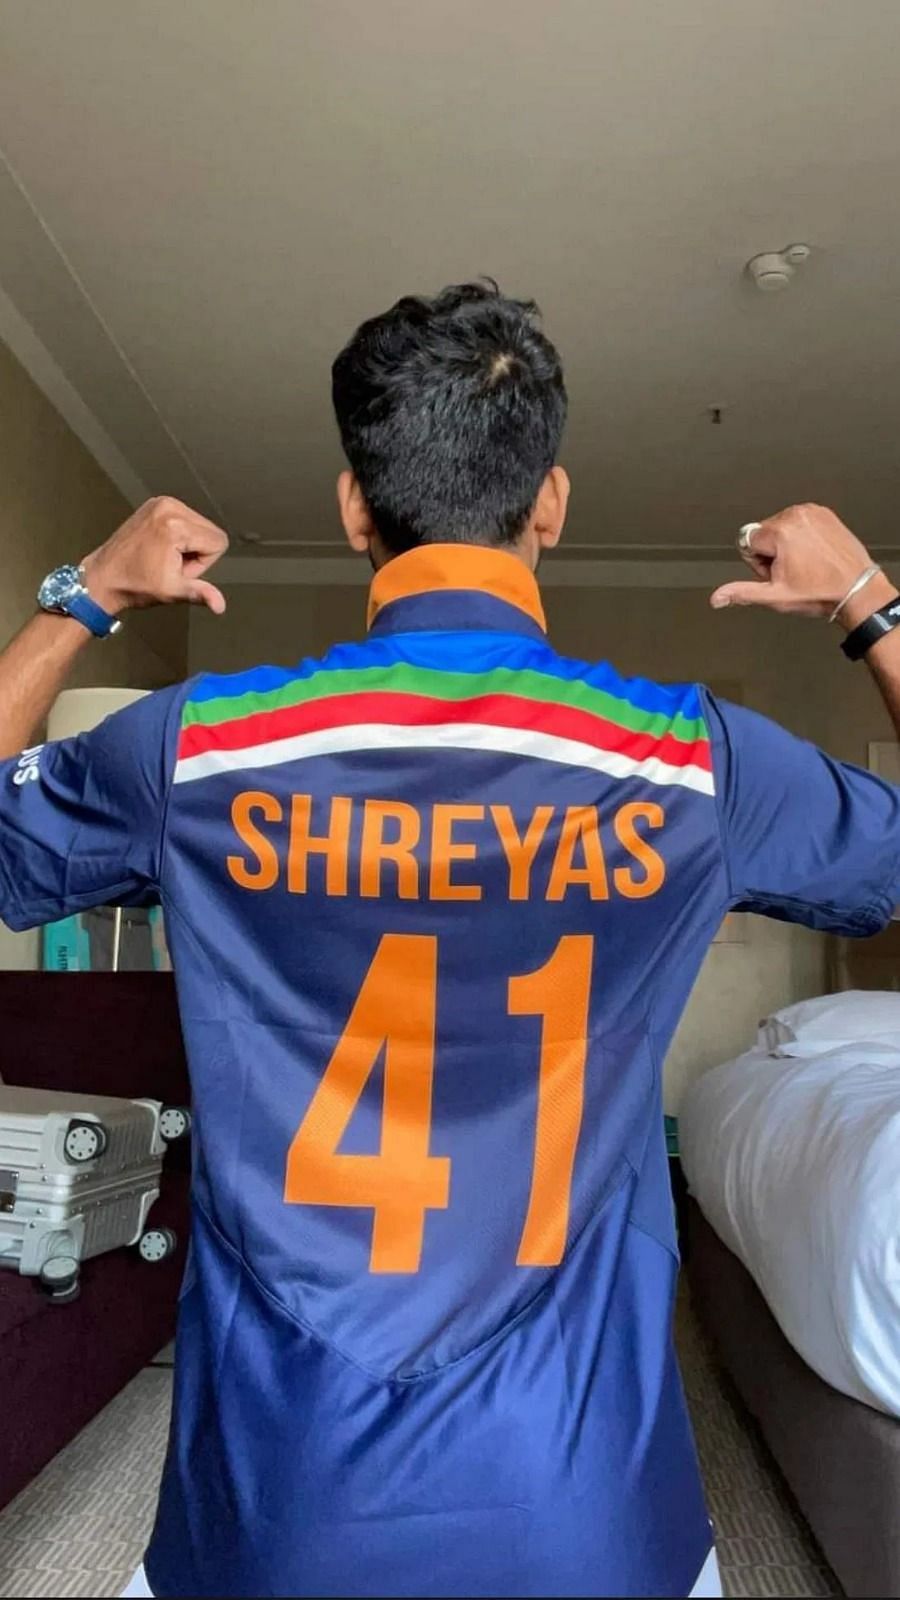 41 jersey number in cricket